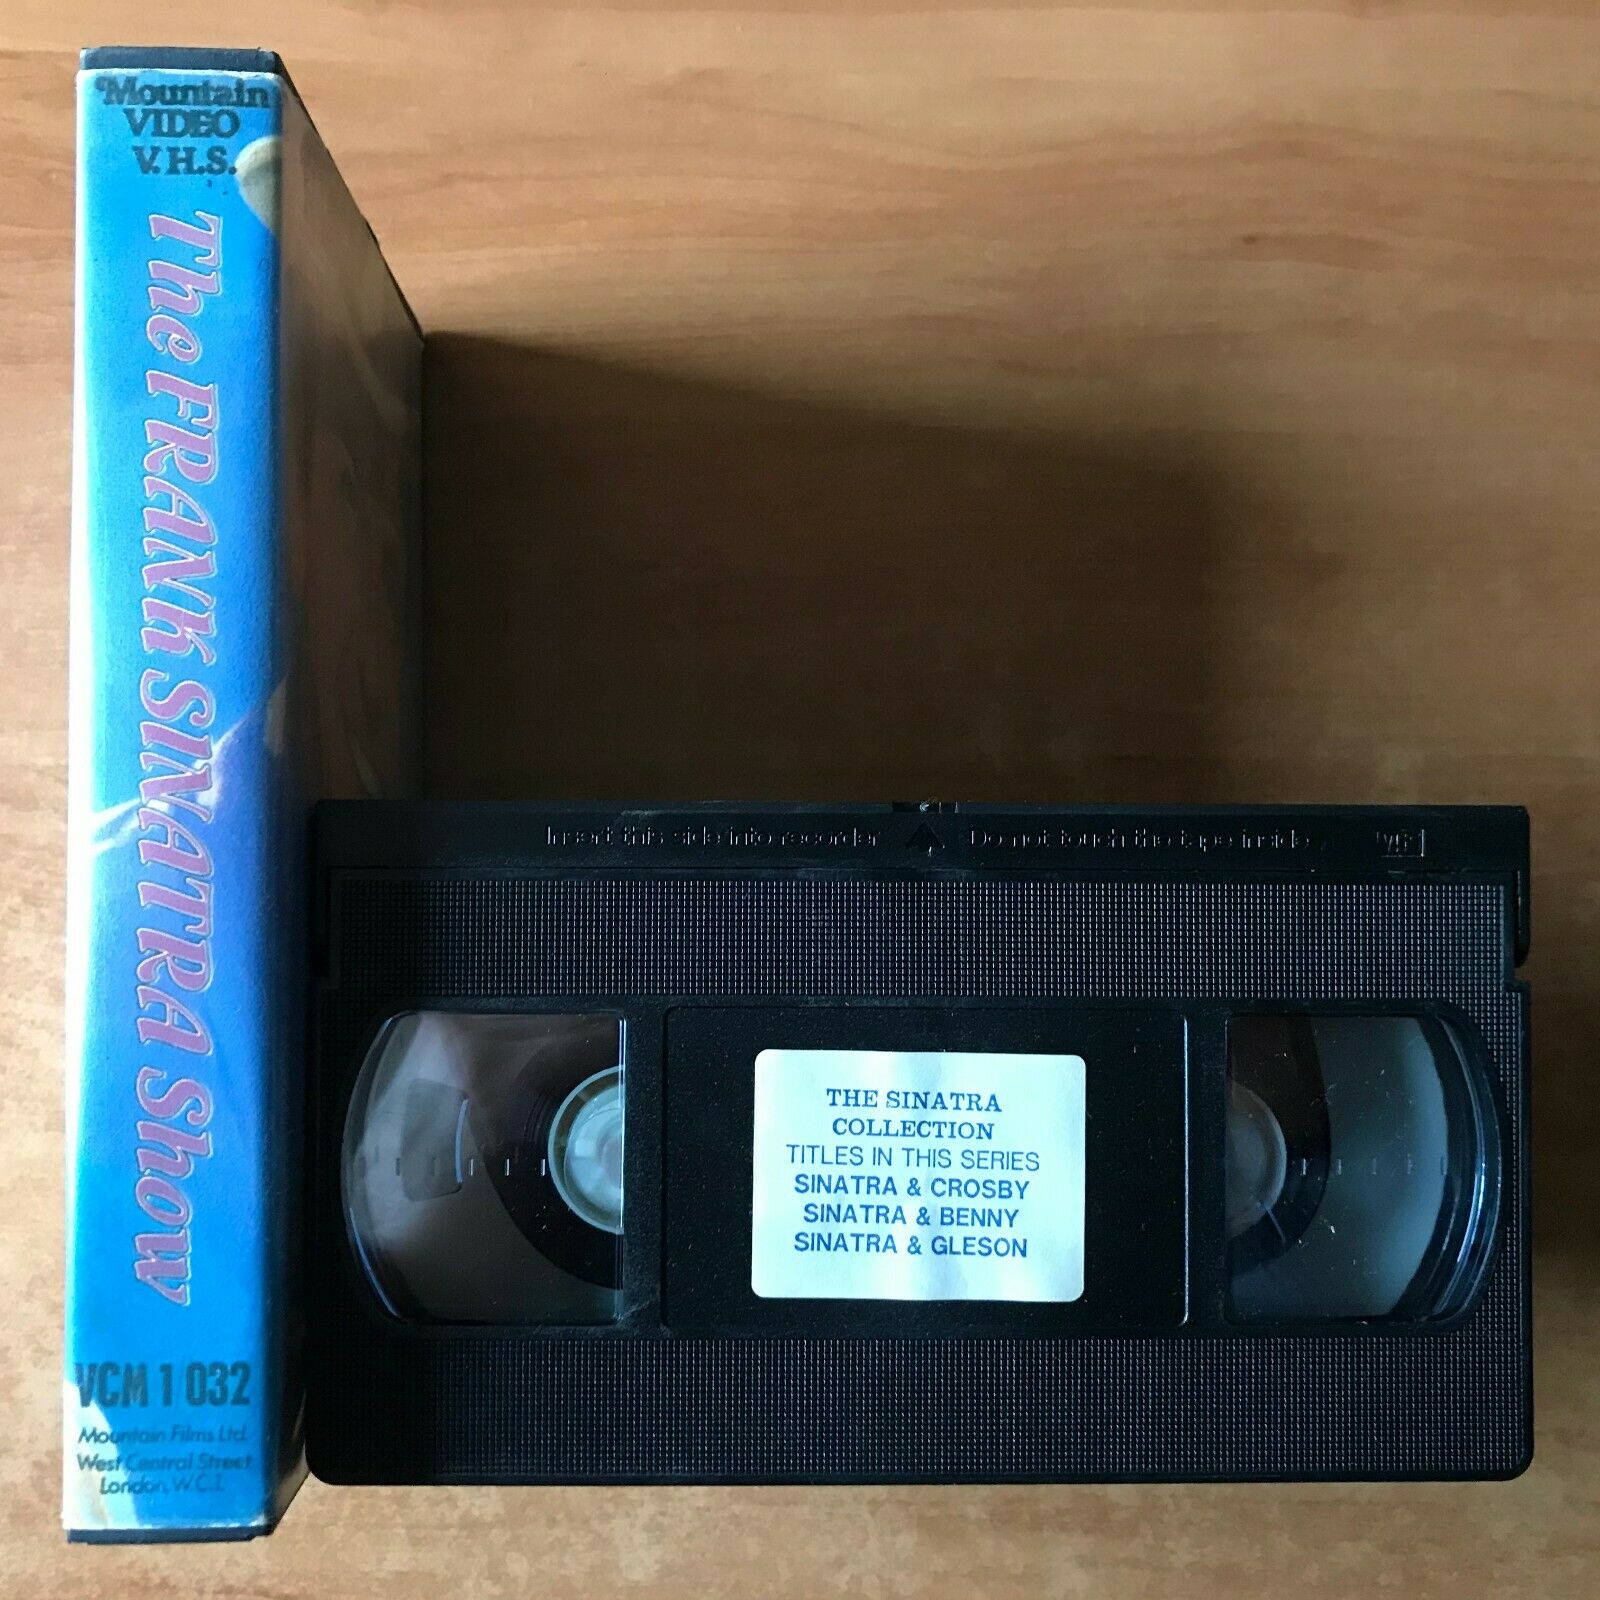 The Frank Sinatra Show; [Mountain Video] Large Box - Comedy Show - Pal VHS-